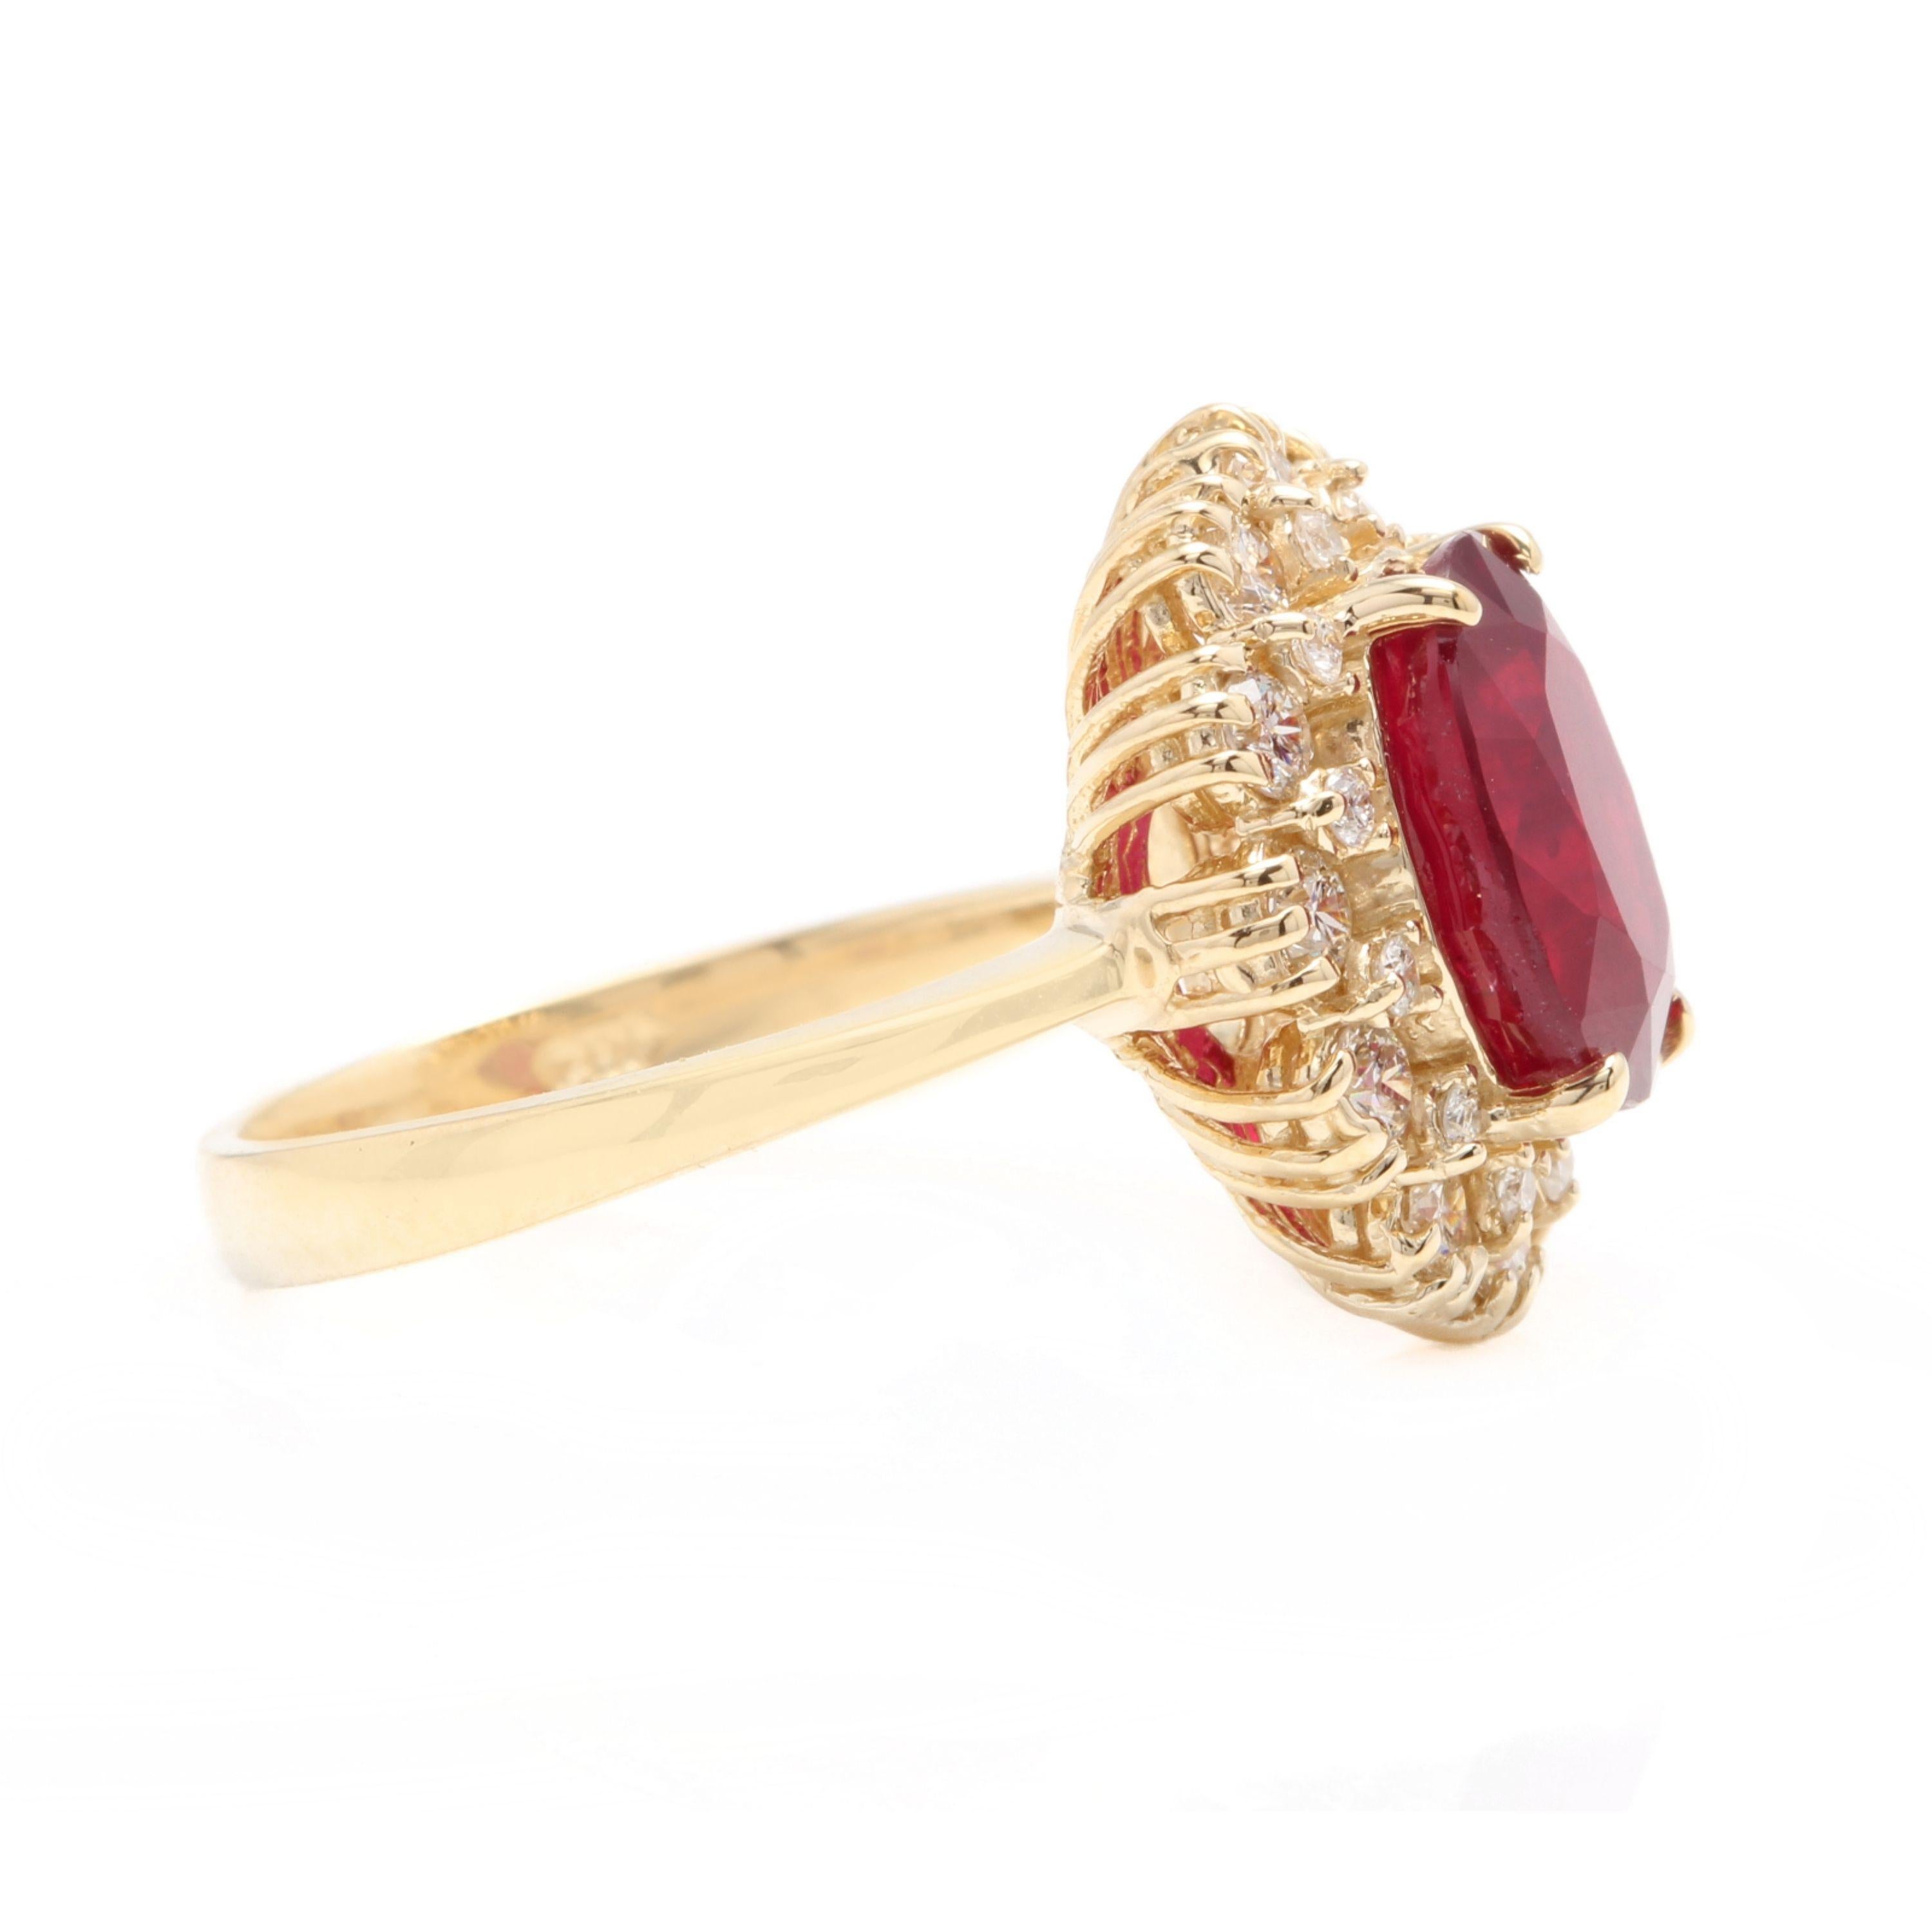 Mixed Cut 7.20 Carat Impressive Natural Red Ruby and Diamond 18 Karat Yellow Gold Ring For Sale